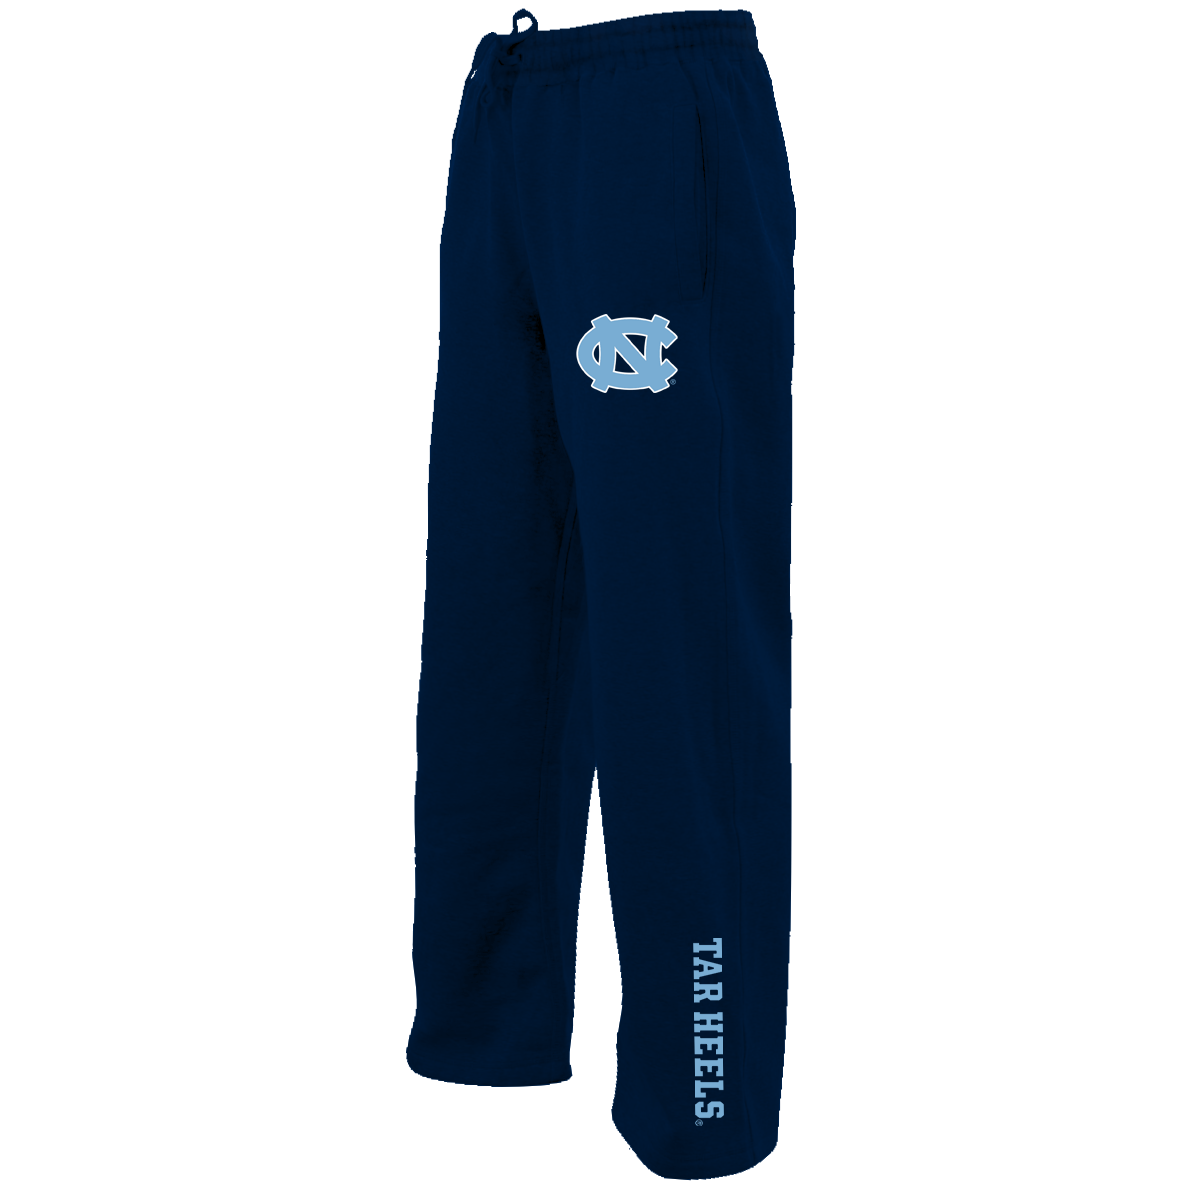 UNC Poly Pants in Navy